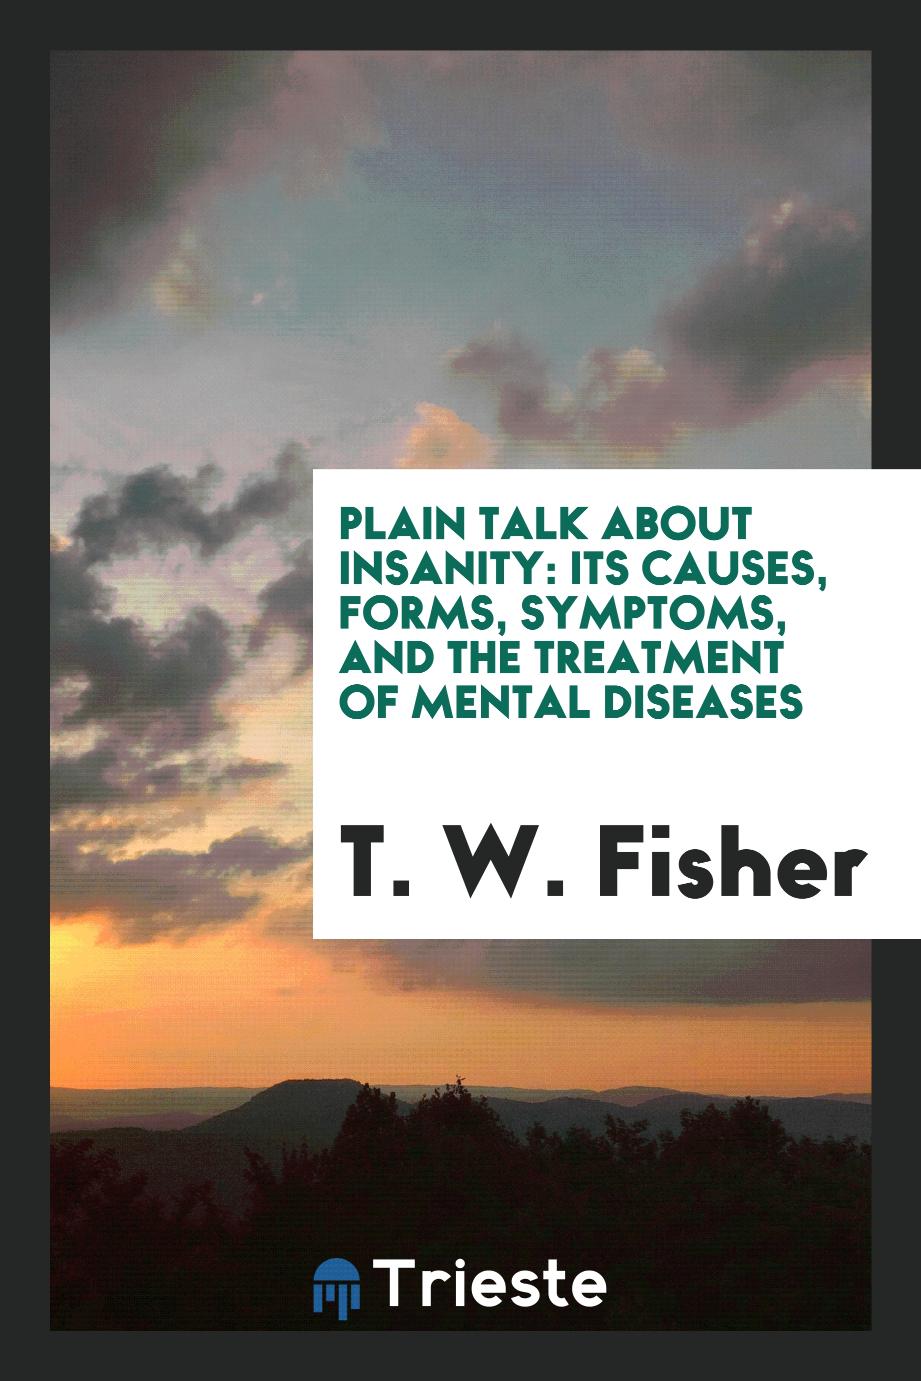 Plain Talk About Insanity: Its Causes, Forms, Symptoms, and the Treatment of Mental Diseases